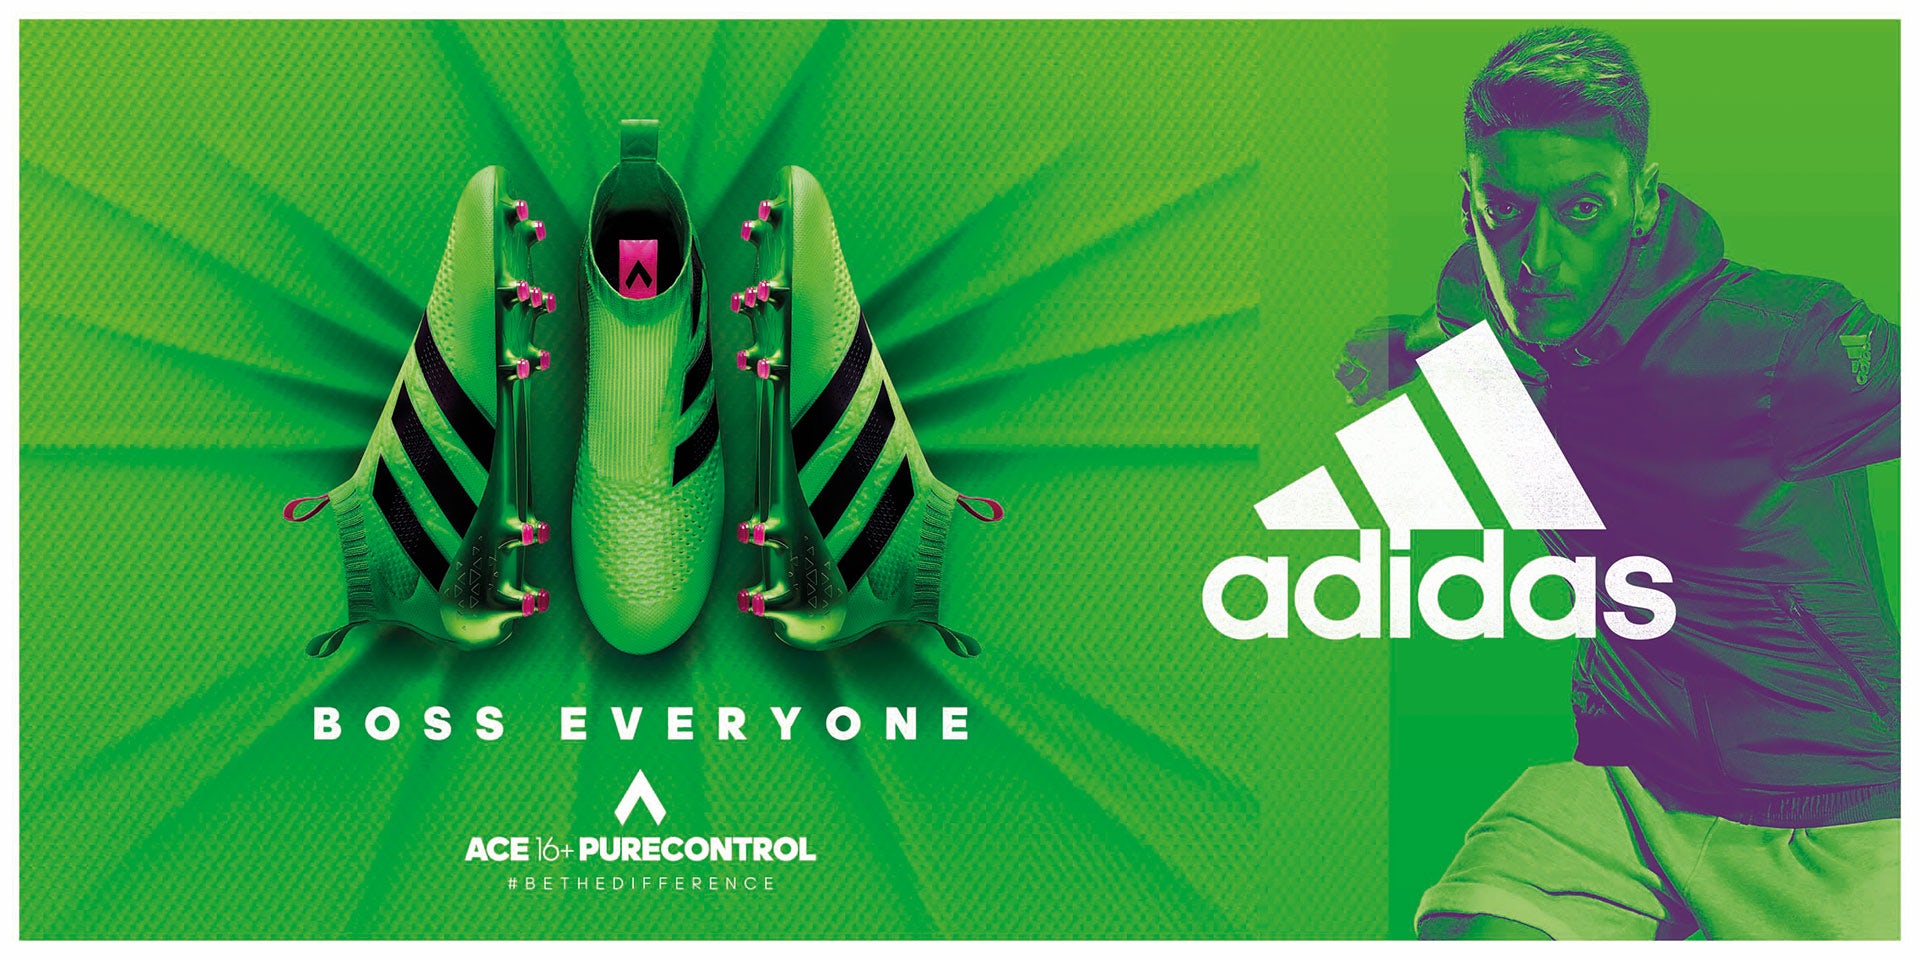 Adidas new ads, good or bad?. Before I started writing this blog